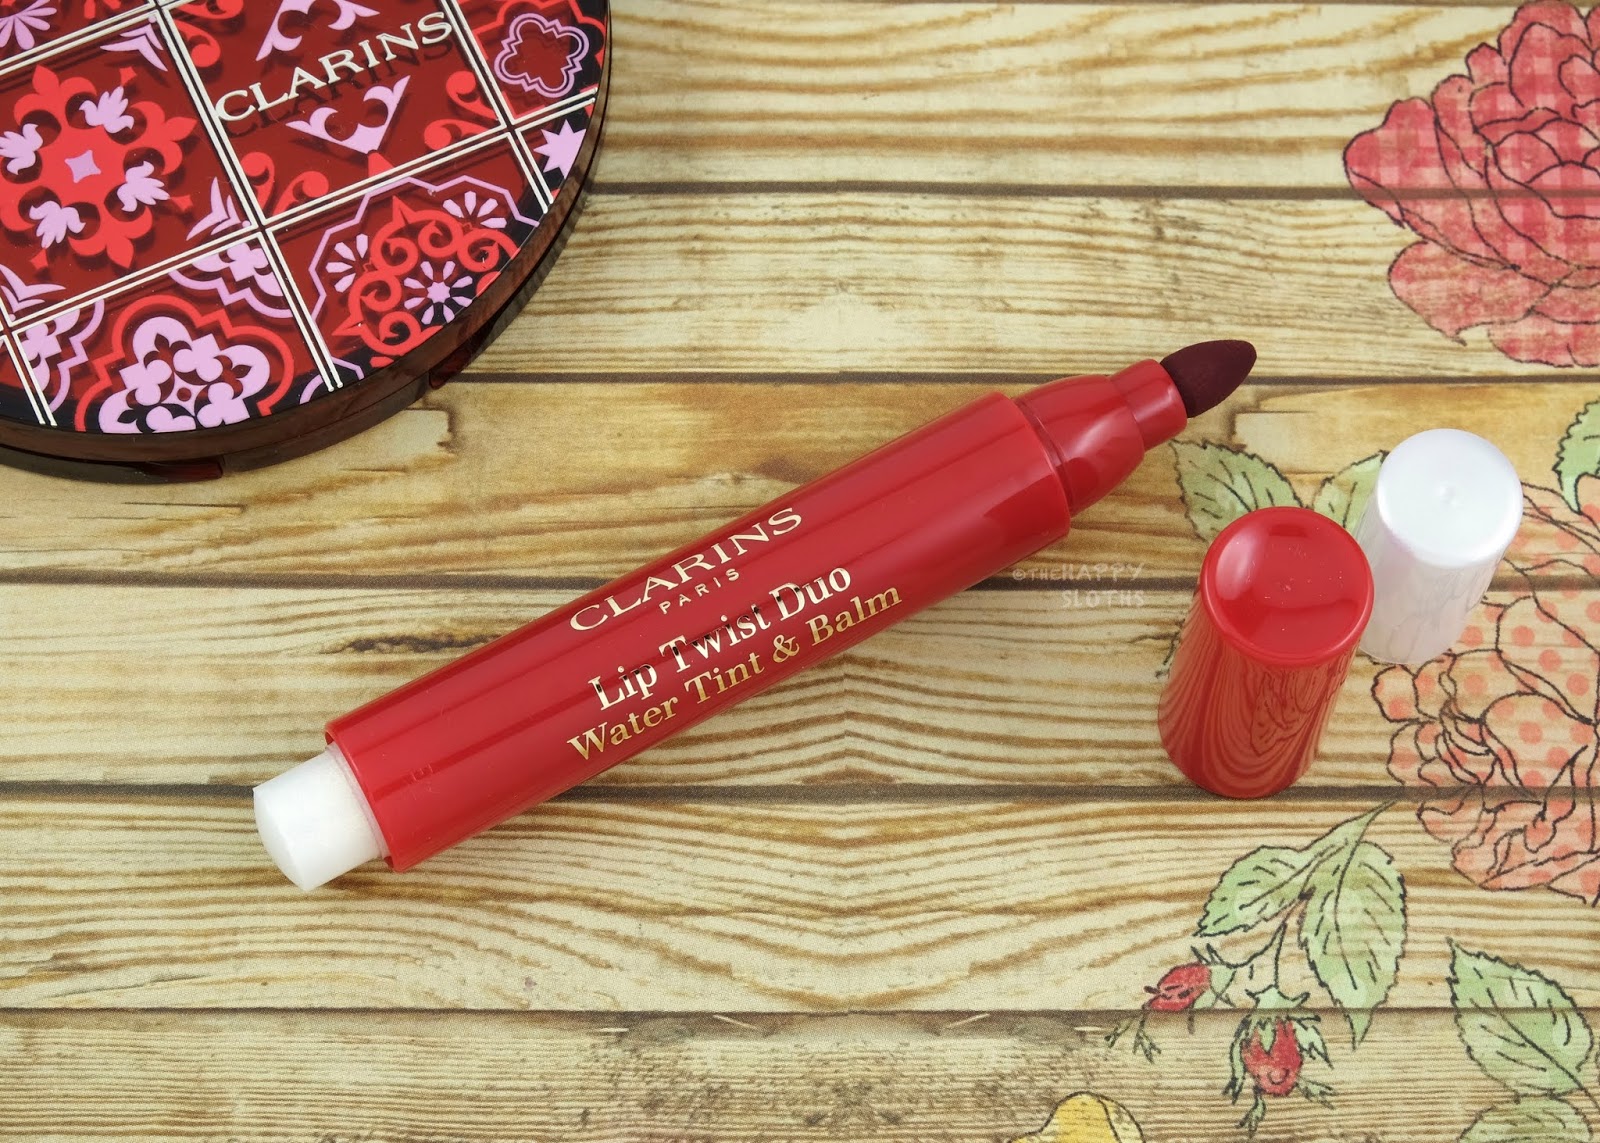 Clarins | Summer 2020 Lip Twist Duo Water Tint & Balm in "01 Red Sunset": Review and Swatches